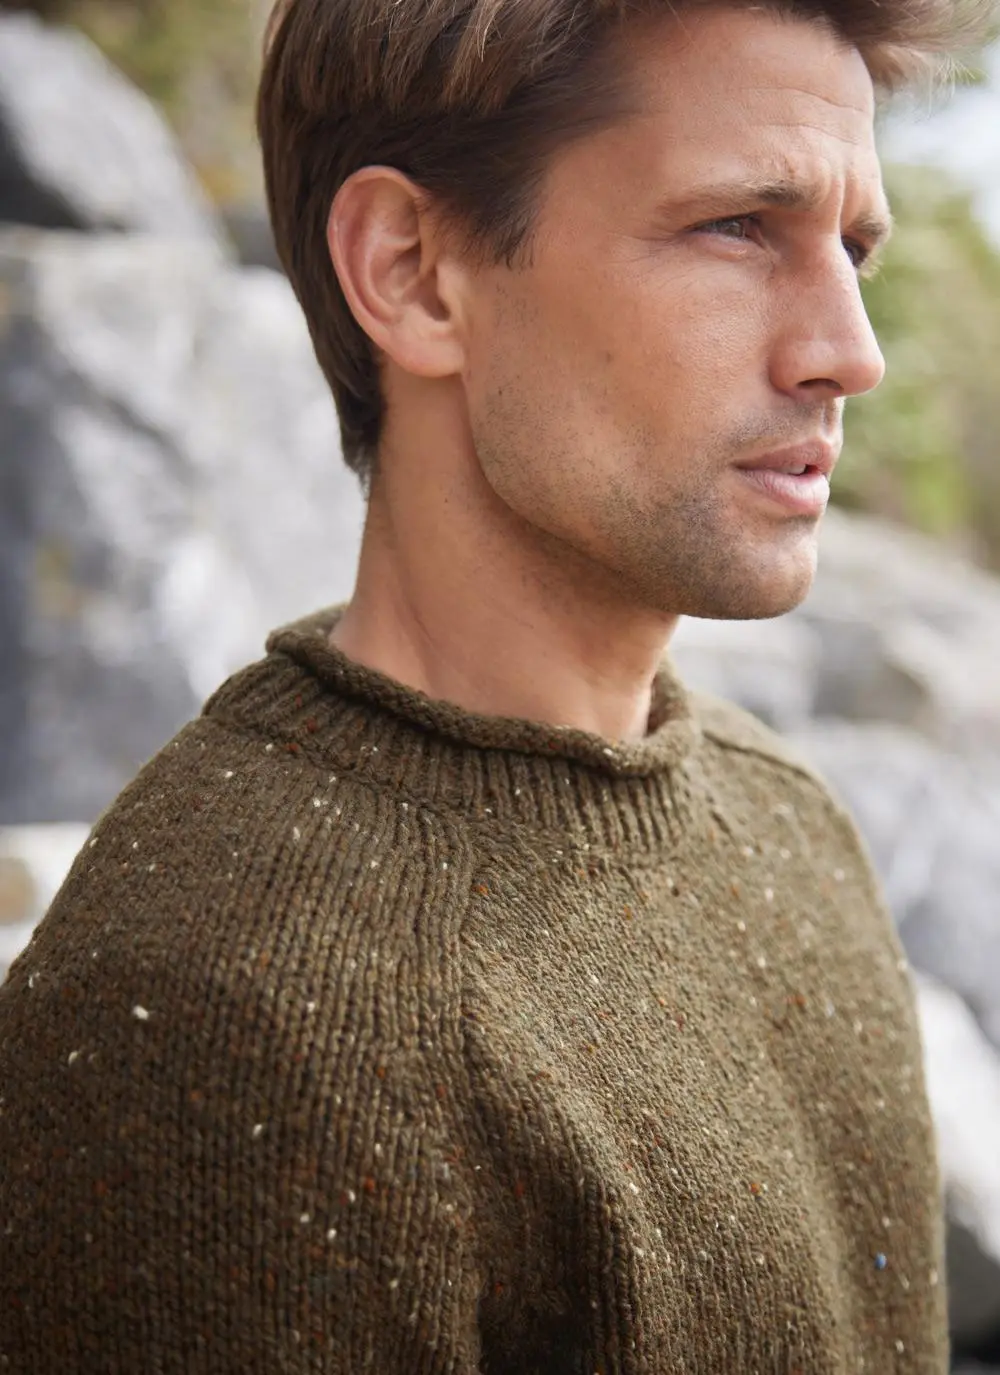 man standing by rocks wearing olive colored knit sweater, close up of neck